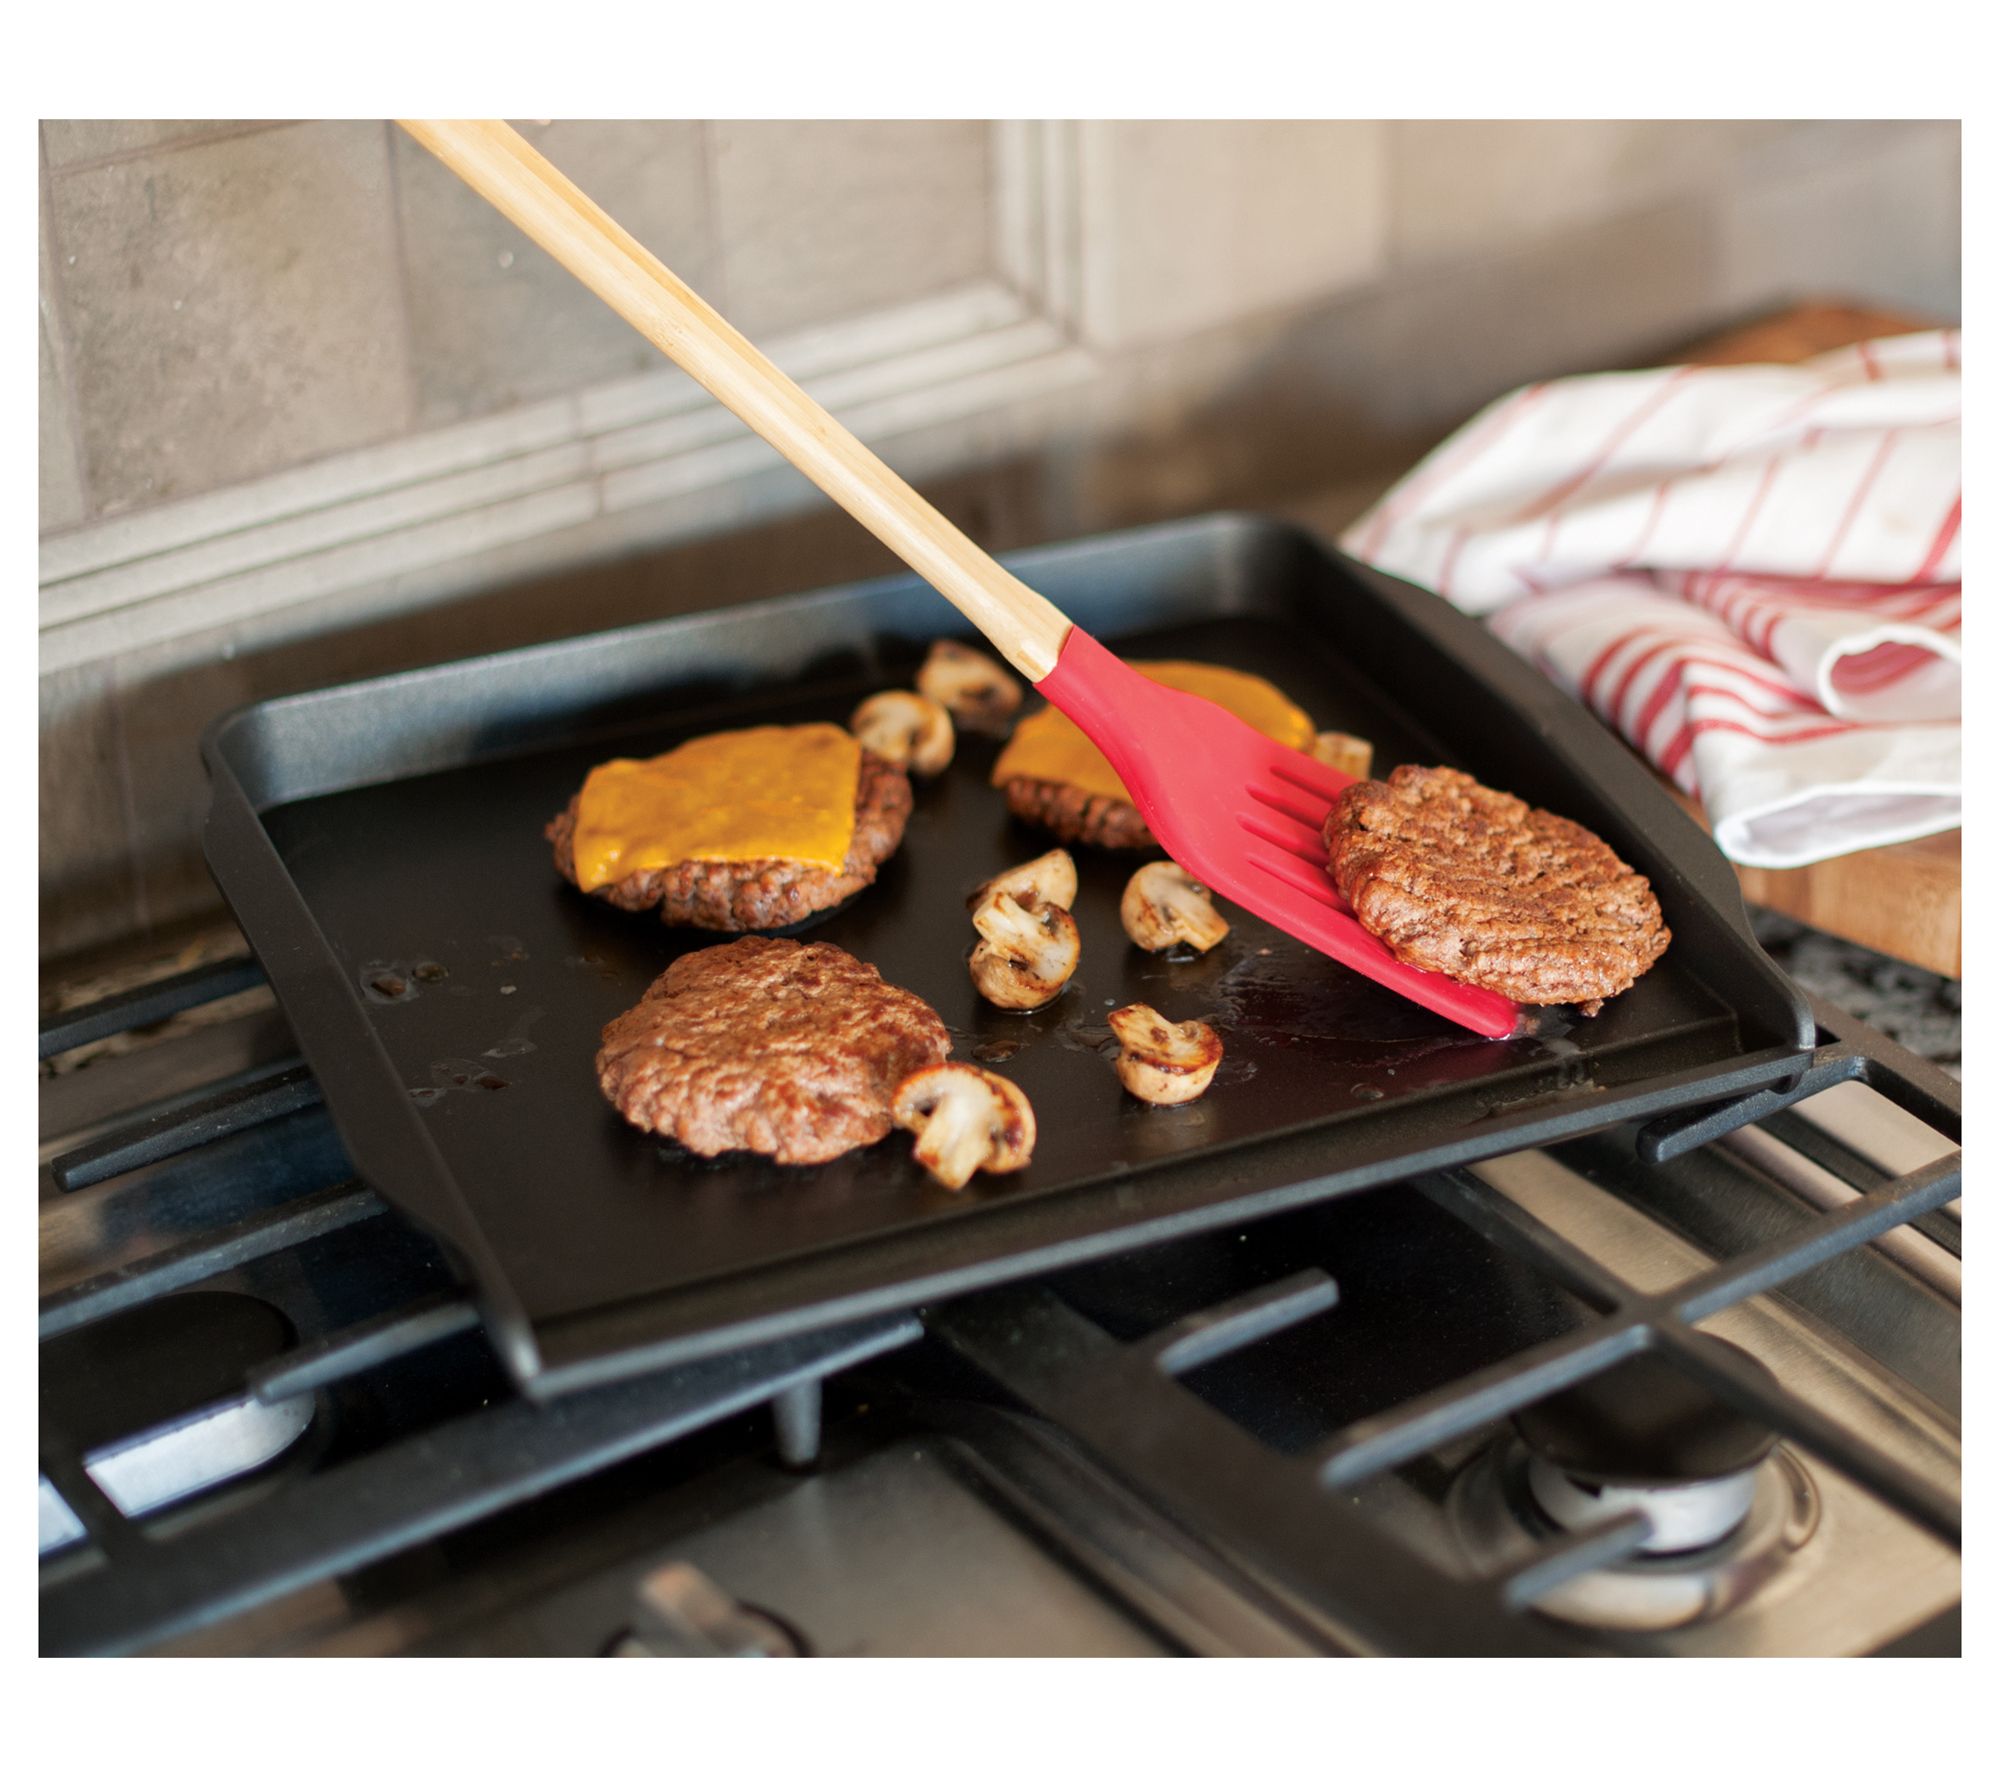 Cast Iron Griddle for Ninja Woodfire Grills,Non-Stick Flat Top Griddle  Grill Pan